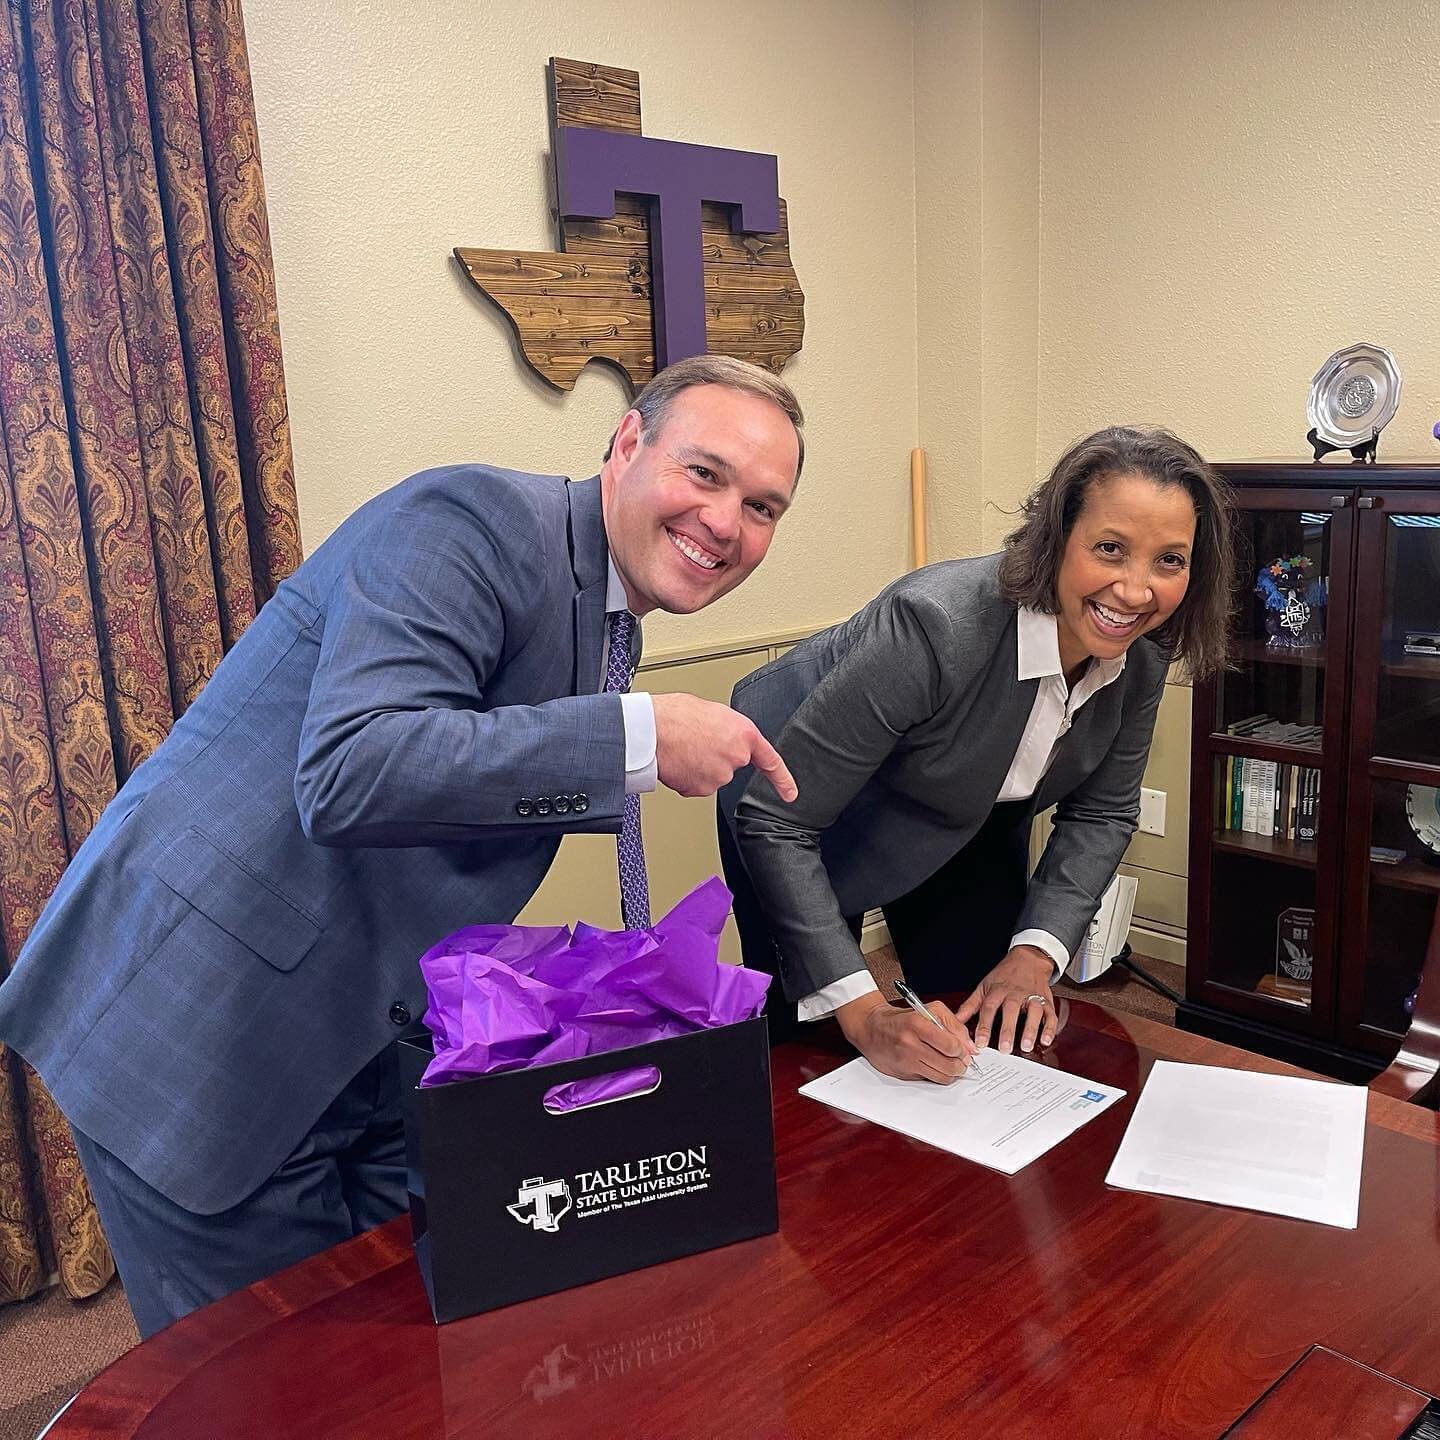 We kicked off a @t3partnership Higher Ed tour to introduce our new Executive Director, Natalie Young Williams, and Mgr of College &amp; Career Success, Beatriz Gutierrez, recently! A special thanks to President Hurley and his team at Tarleton for hos